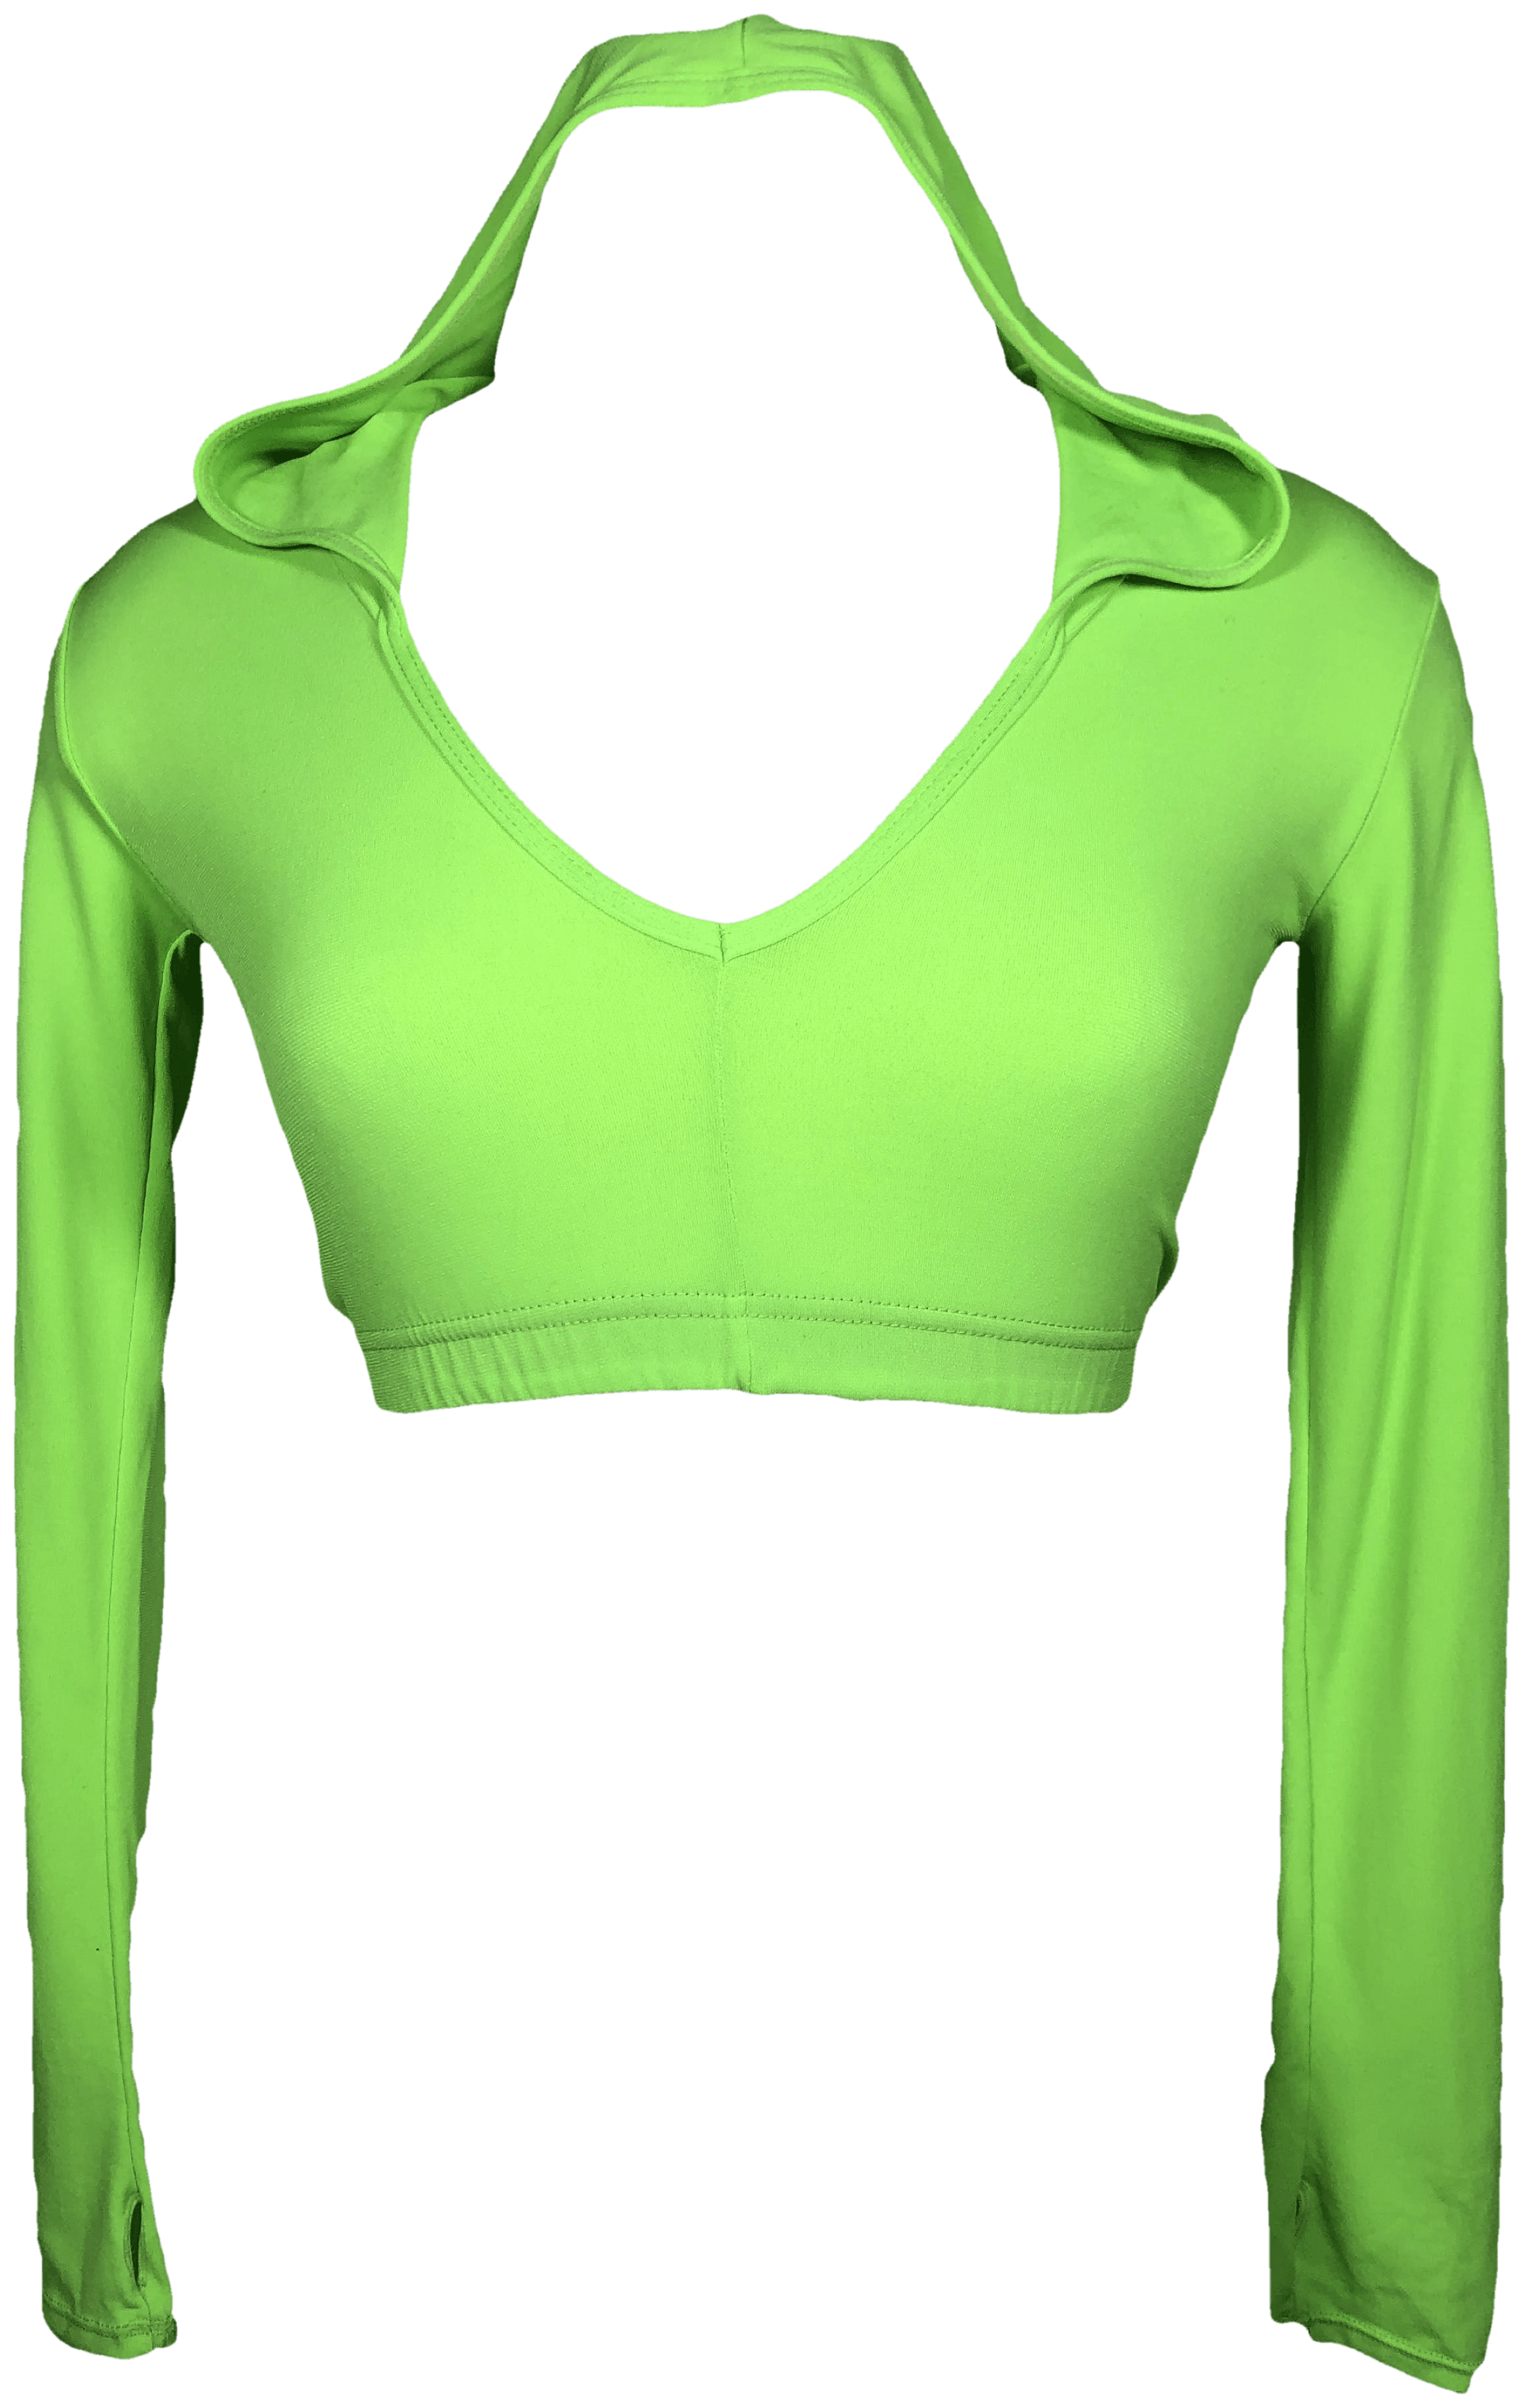 Vintage Neon Green Cropped Hooded ...